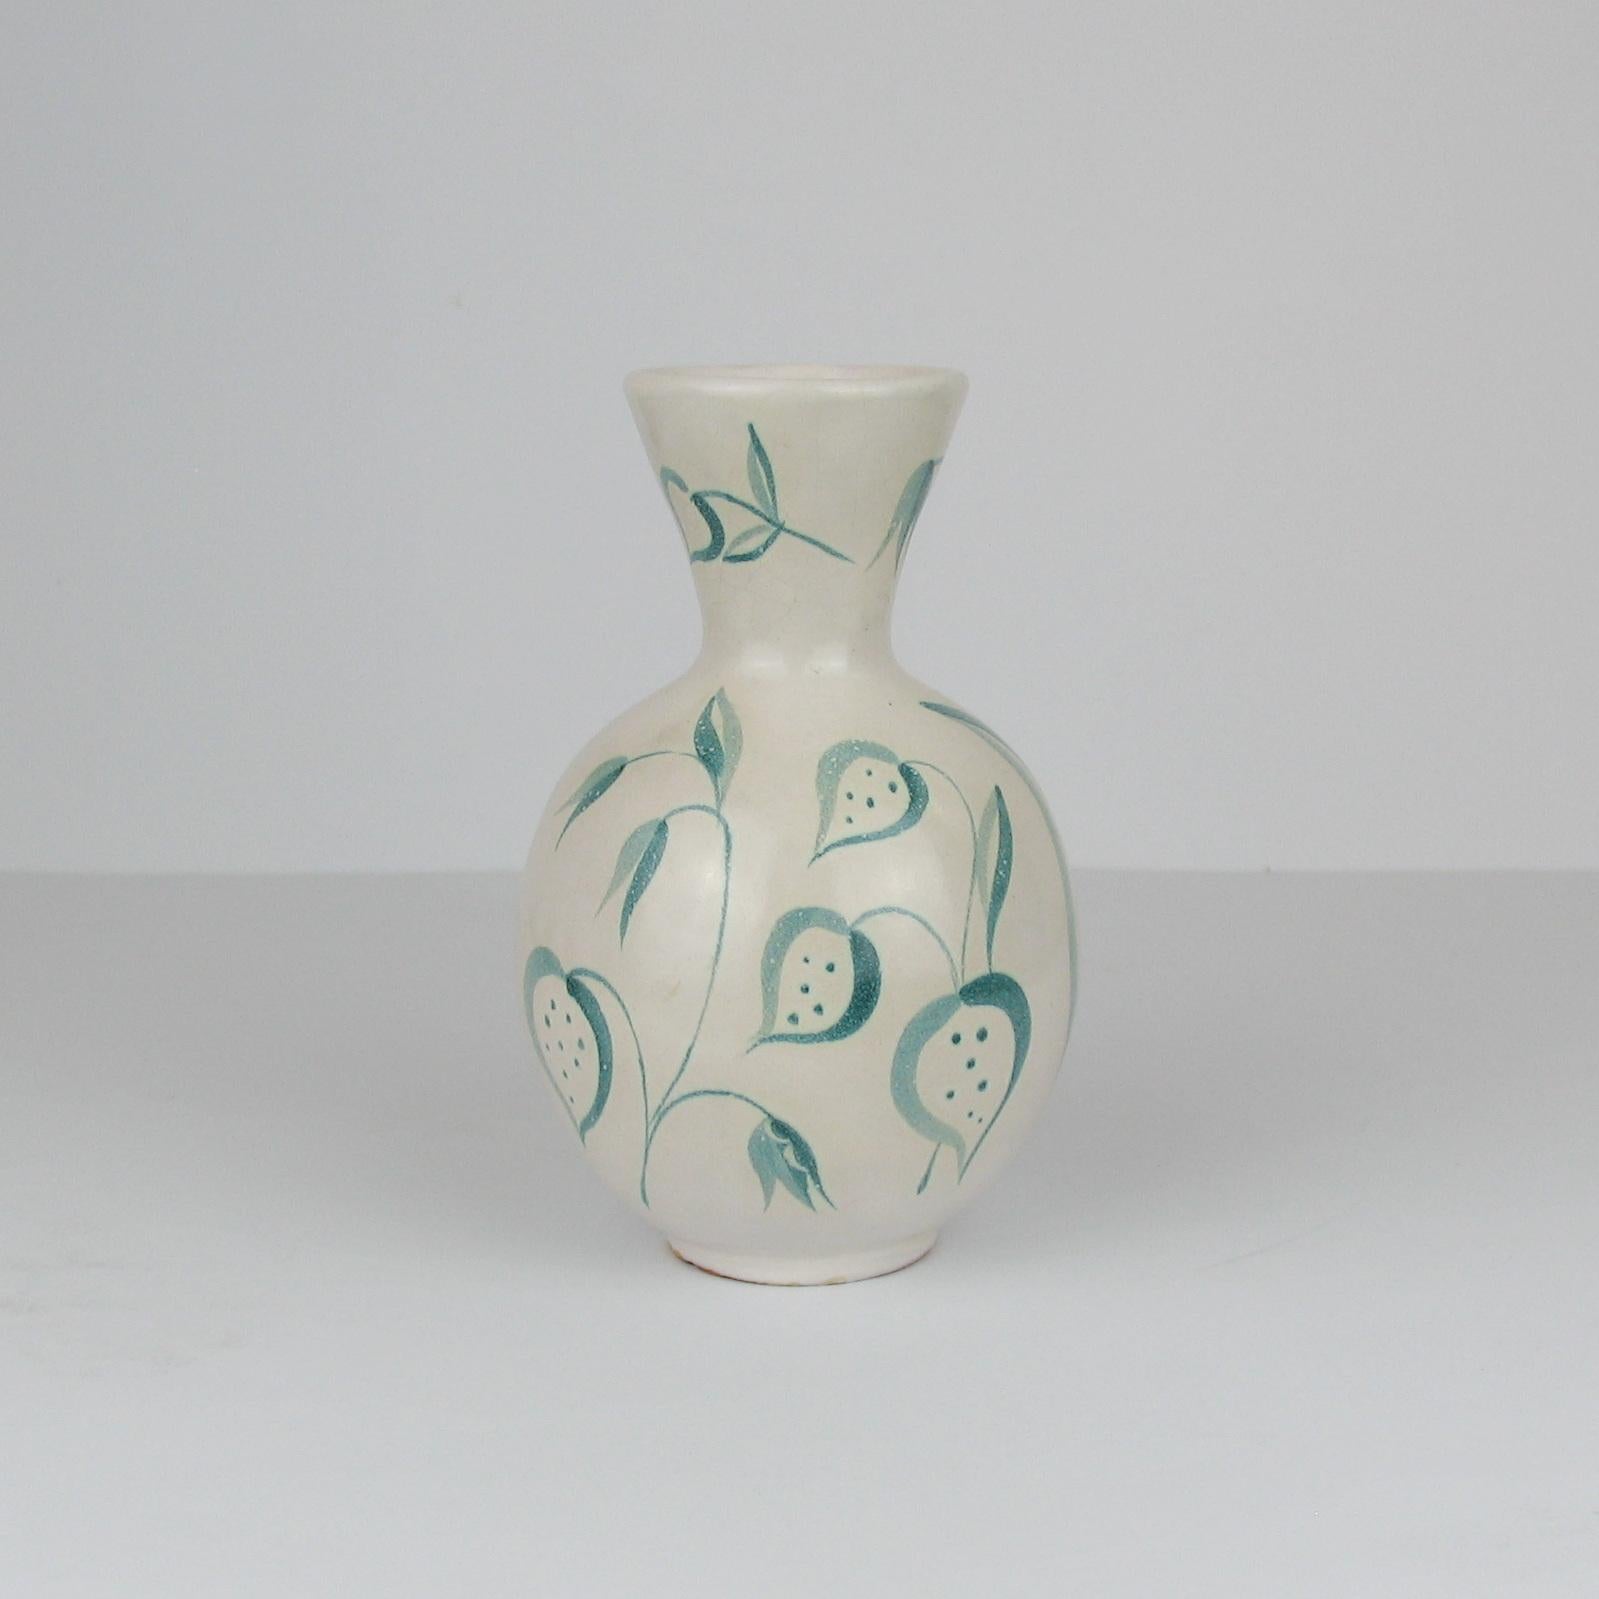 Hand-Painted Ceramic Vase Flower Meadow by Anna-Lisa Thomson, Upsala Ekeby, 1940s, Sweden For Sale